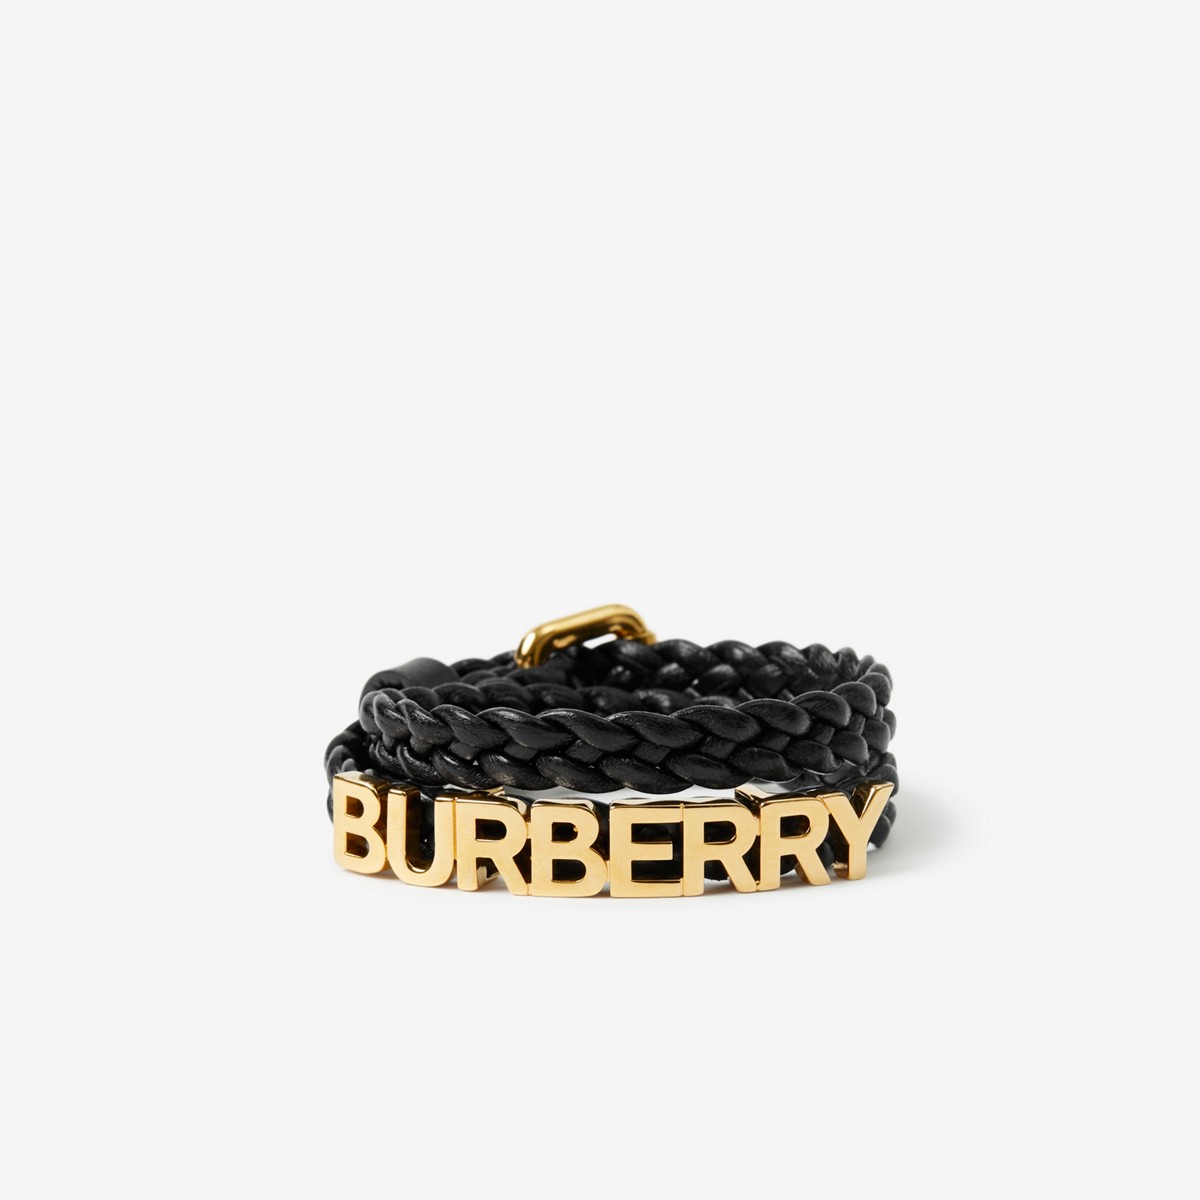 BURBERRY BURBERRY GOLD-PLATED LOGO LEATHER BRACELET